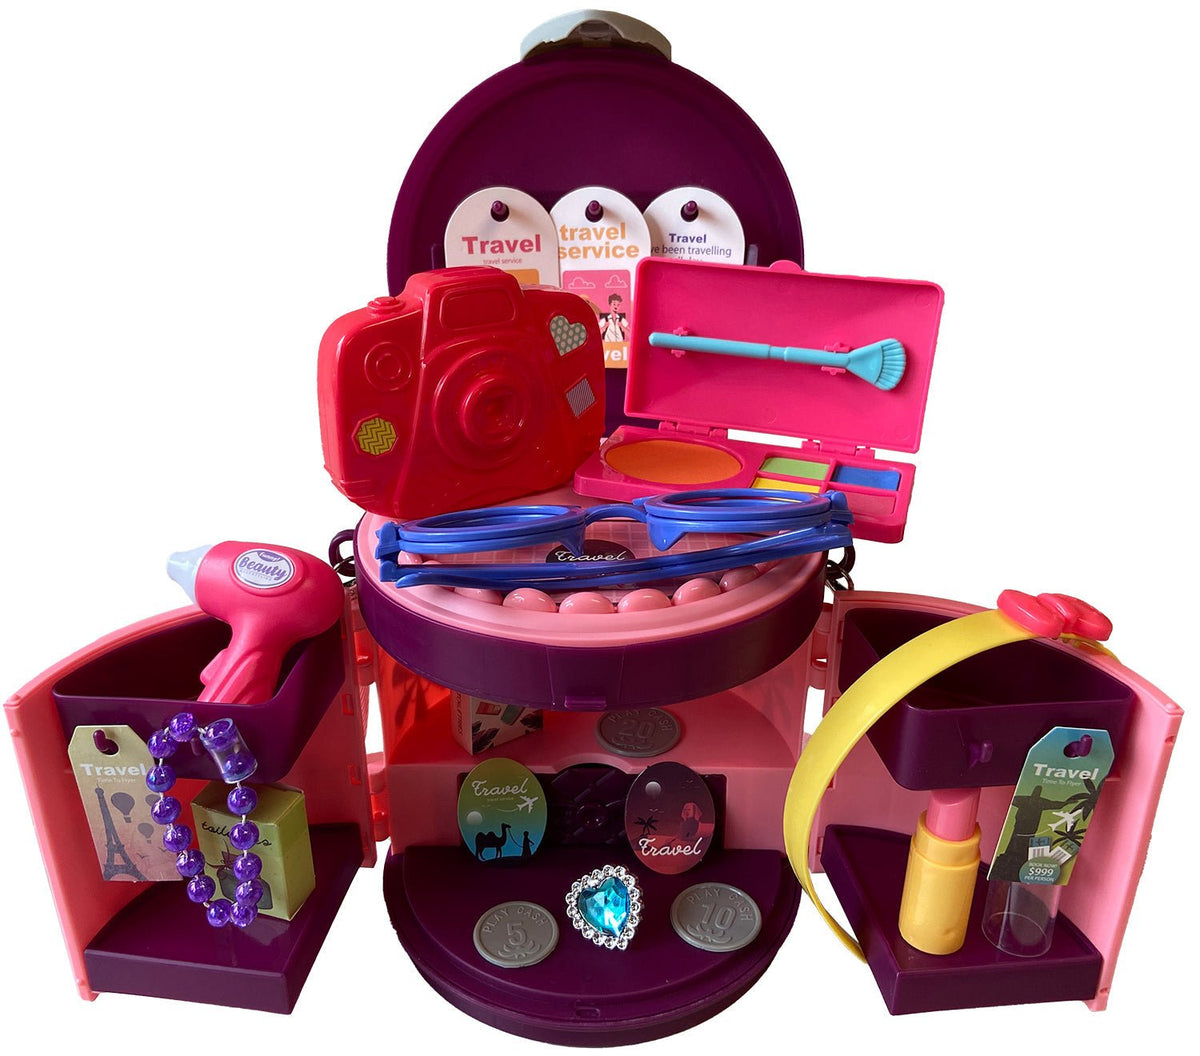 Travel Case Themed Playset- Travel Edition